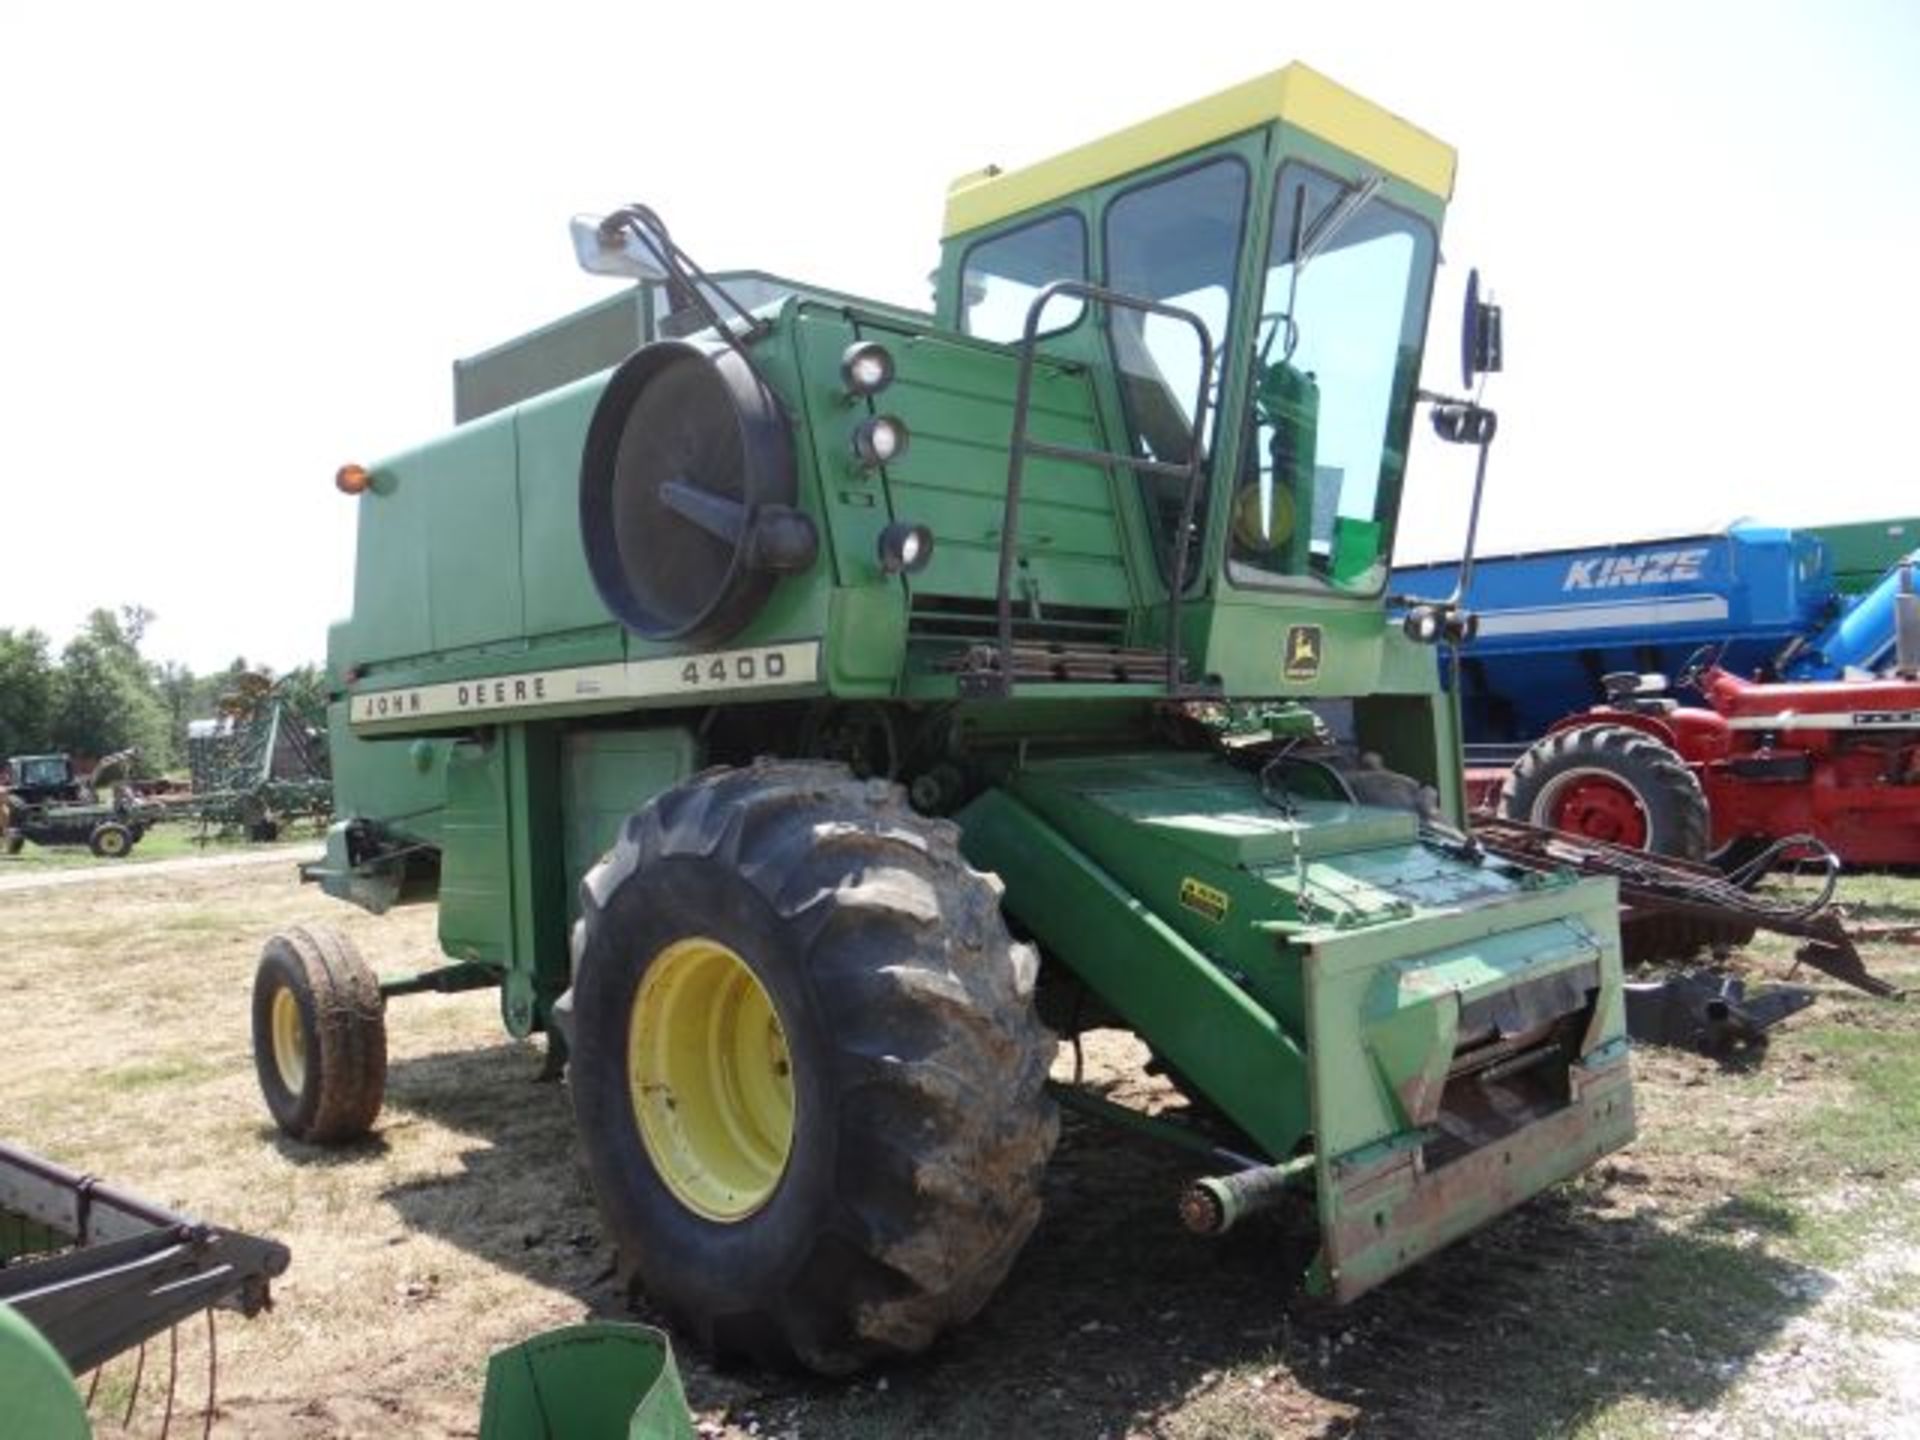 JD 4400 Combine, 1979 Less than 3000 hrs, Diesel, 2wd, Chopper, Lots of New Parts, Runs and Works - Image 2 of 3